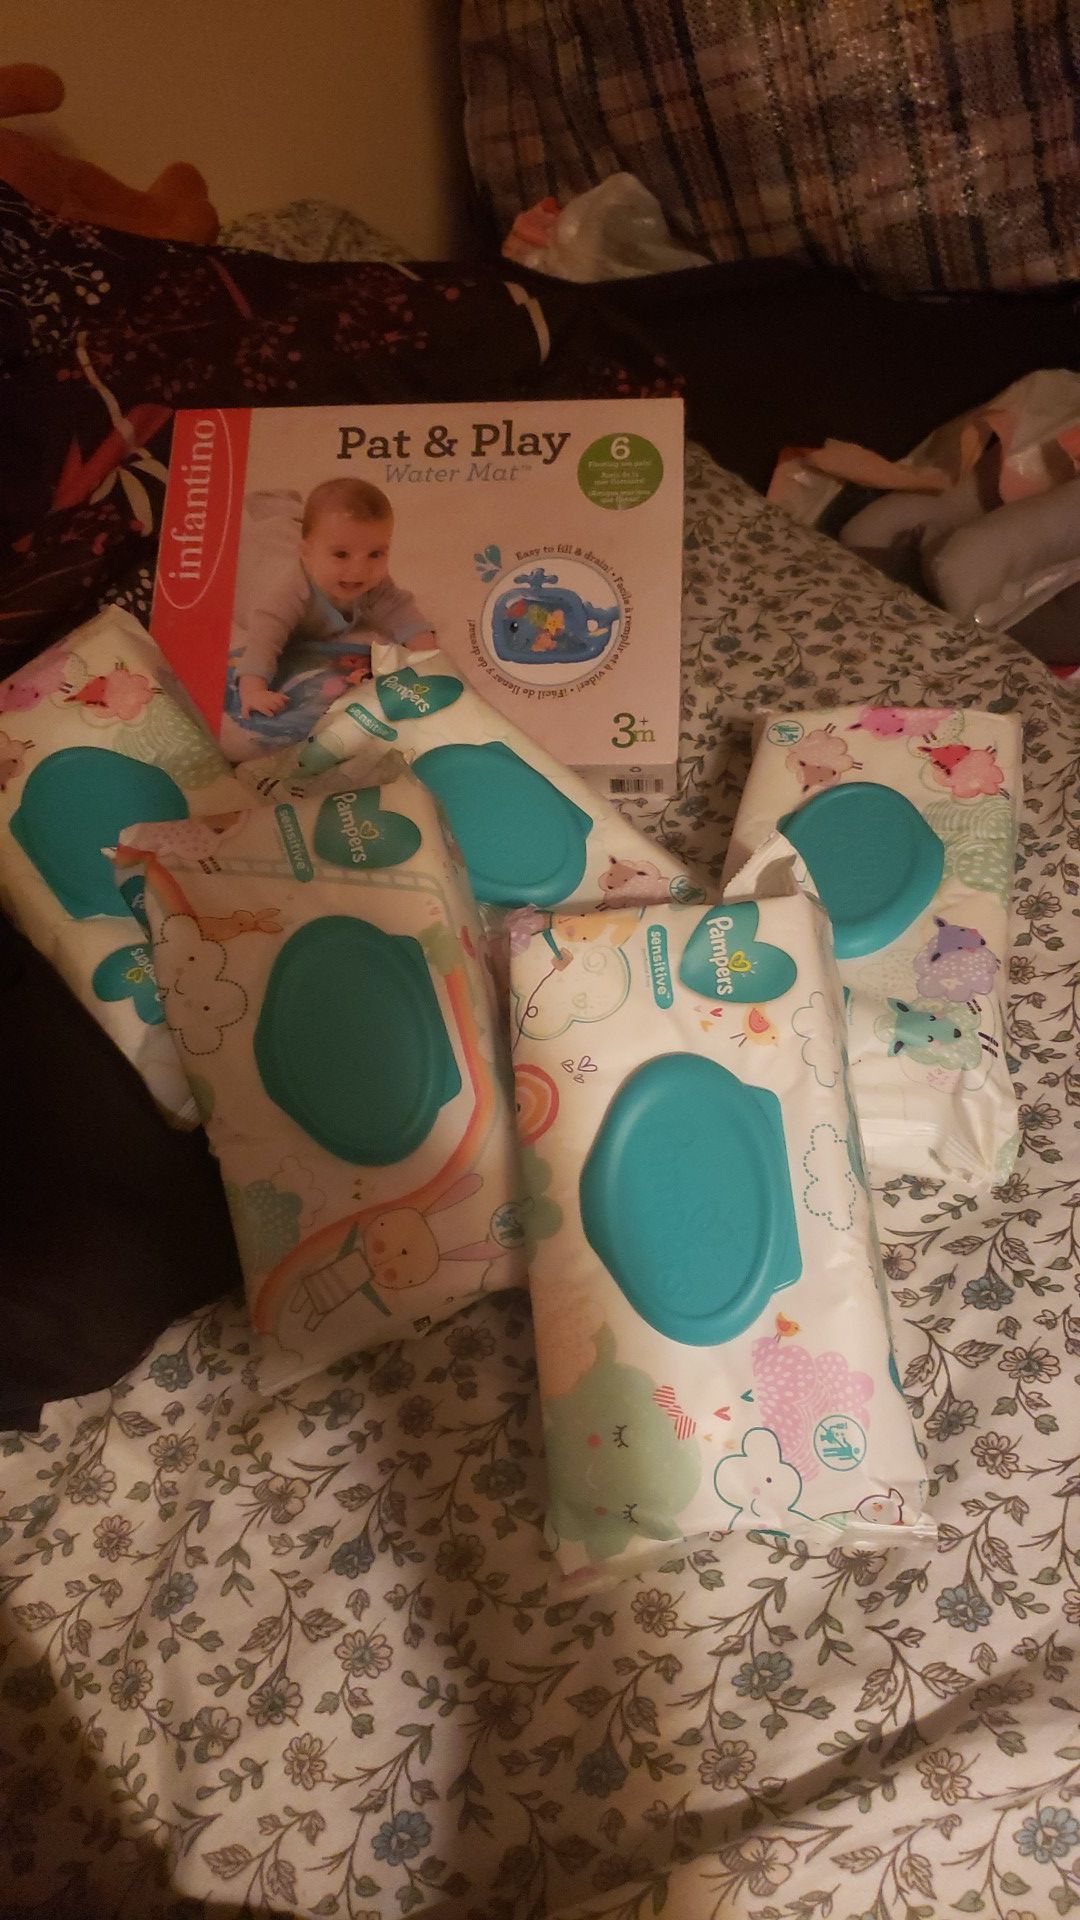 5 packs of Pampers Sensitive Wipes and Pat and Play water mat